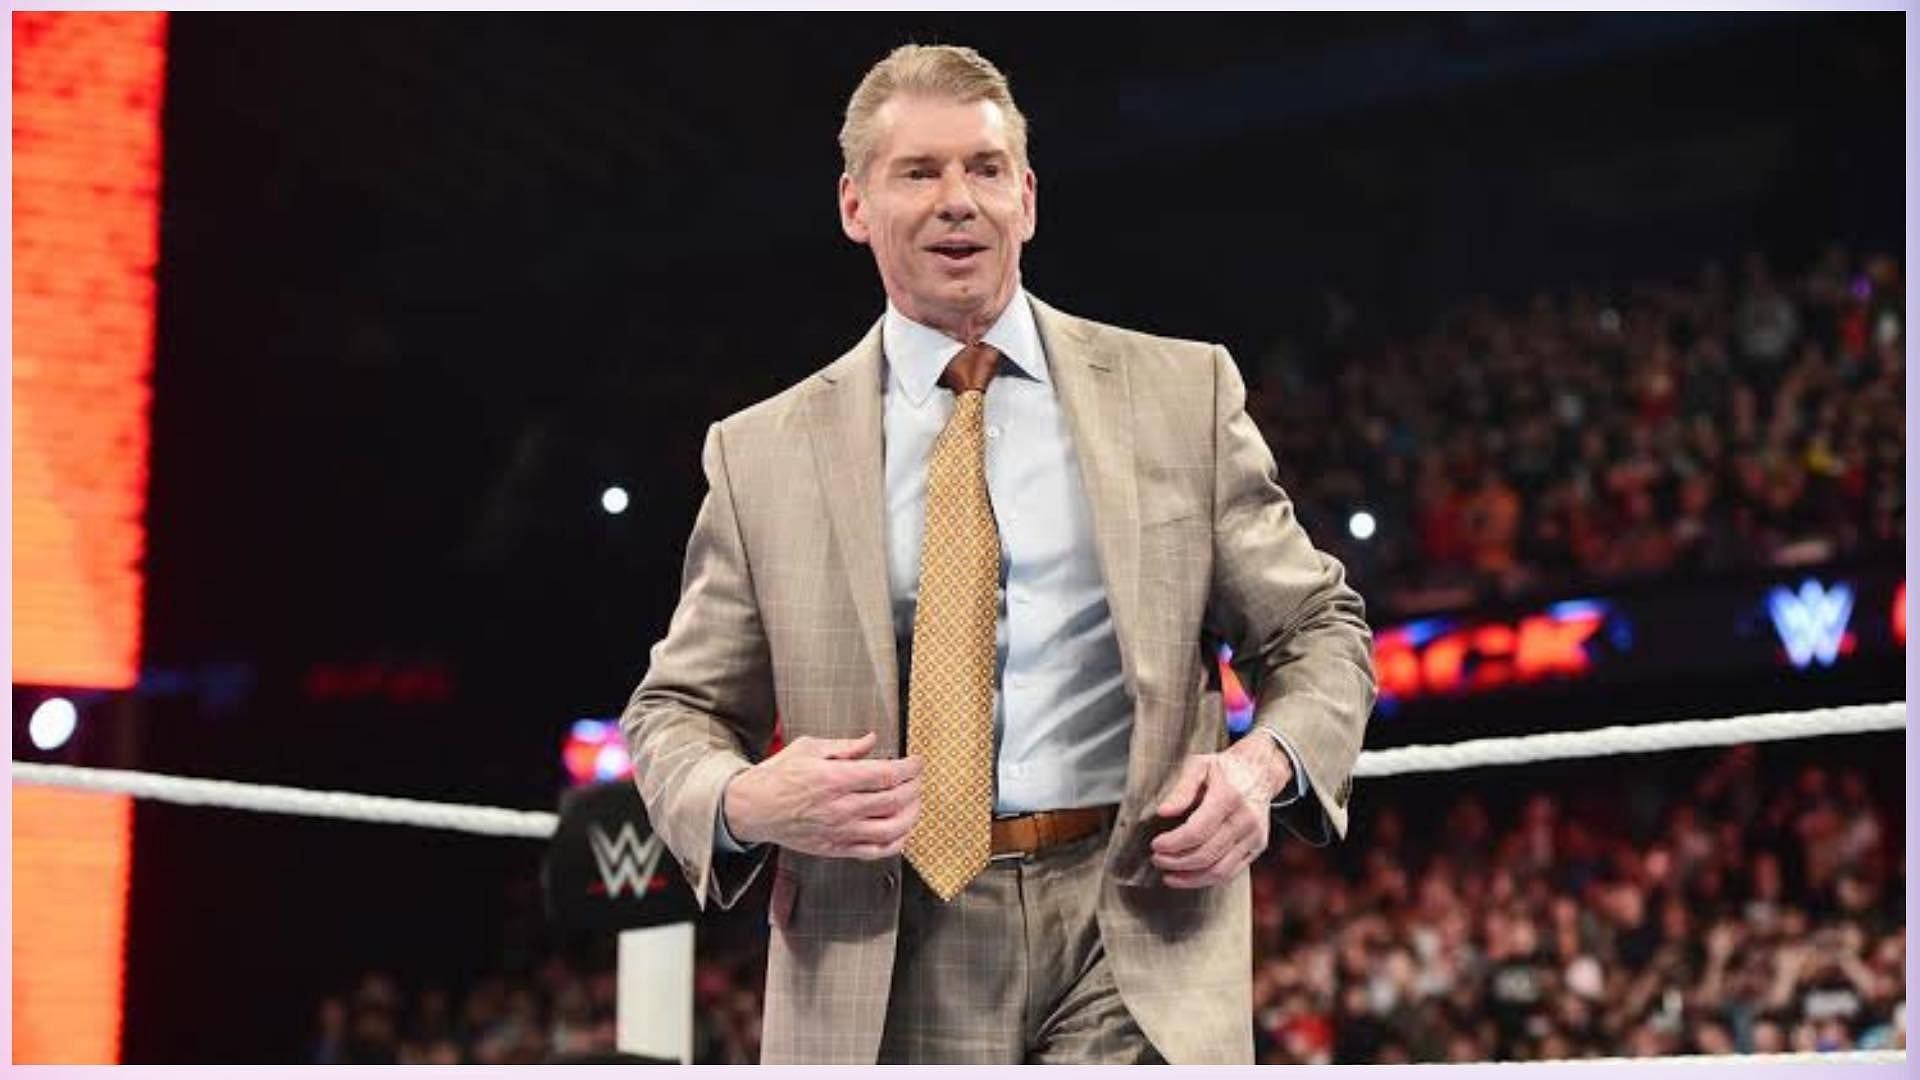 Will Vince McMahon be removed from everywhere in WWE?